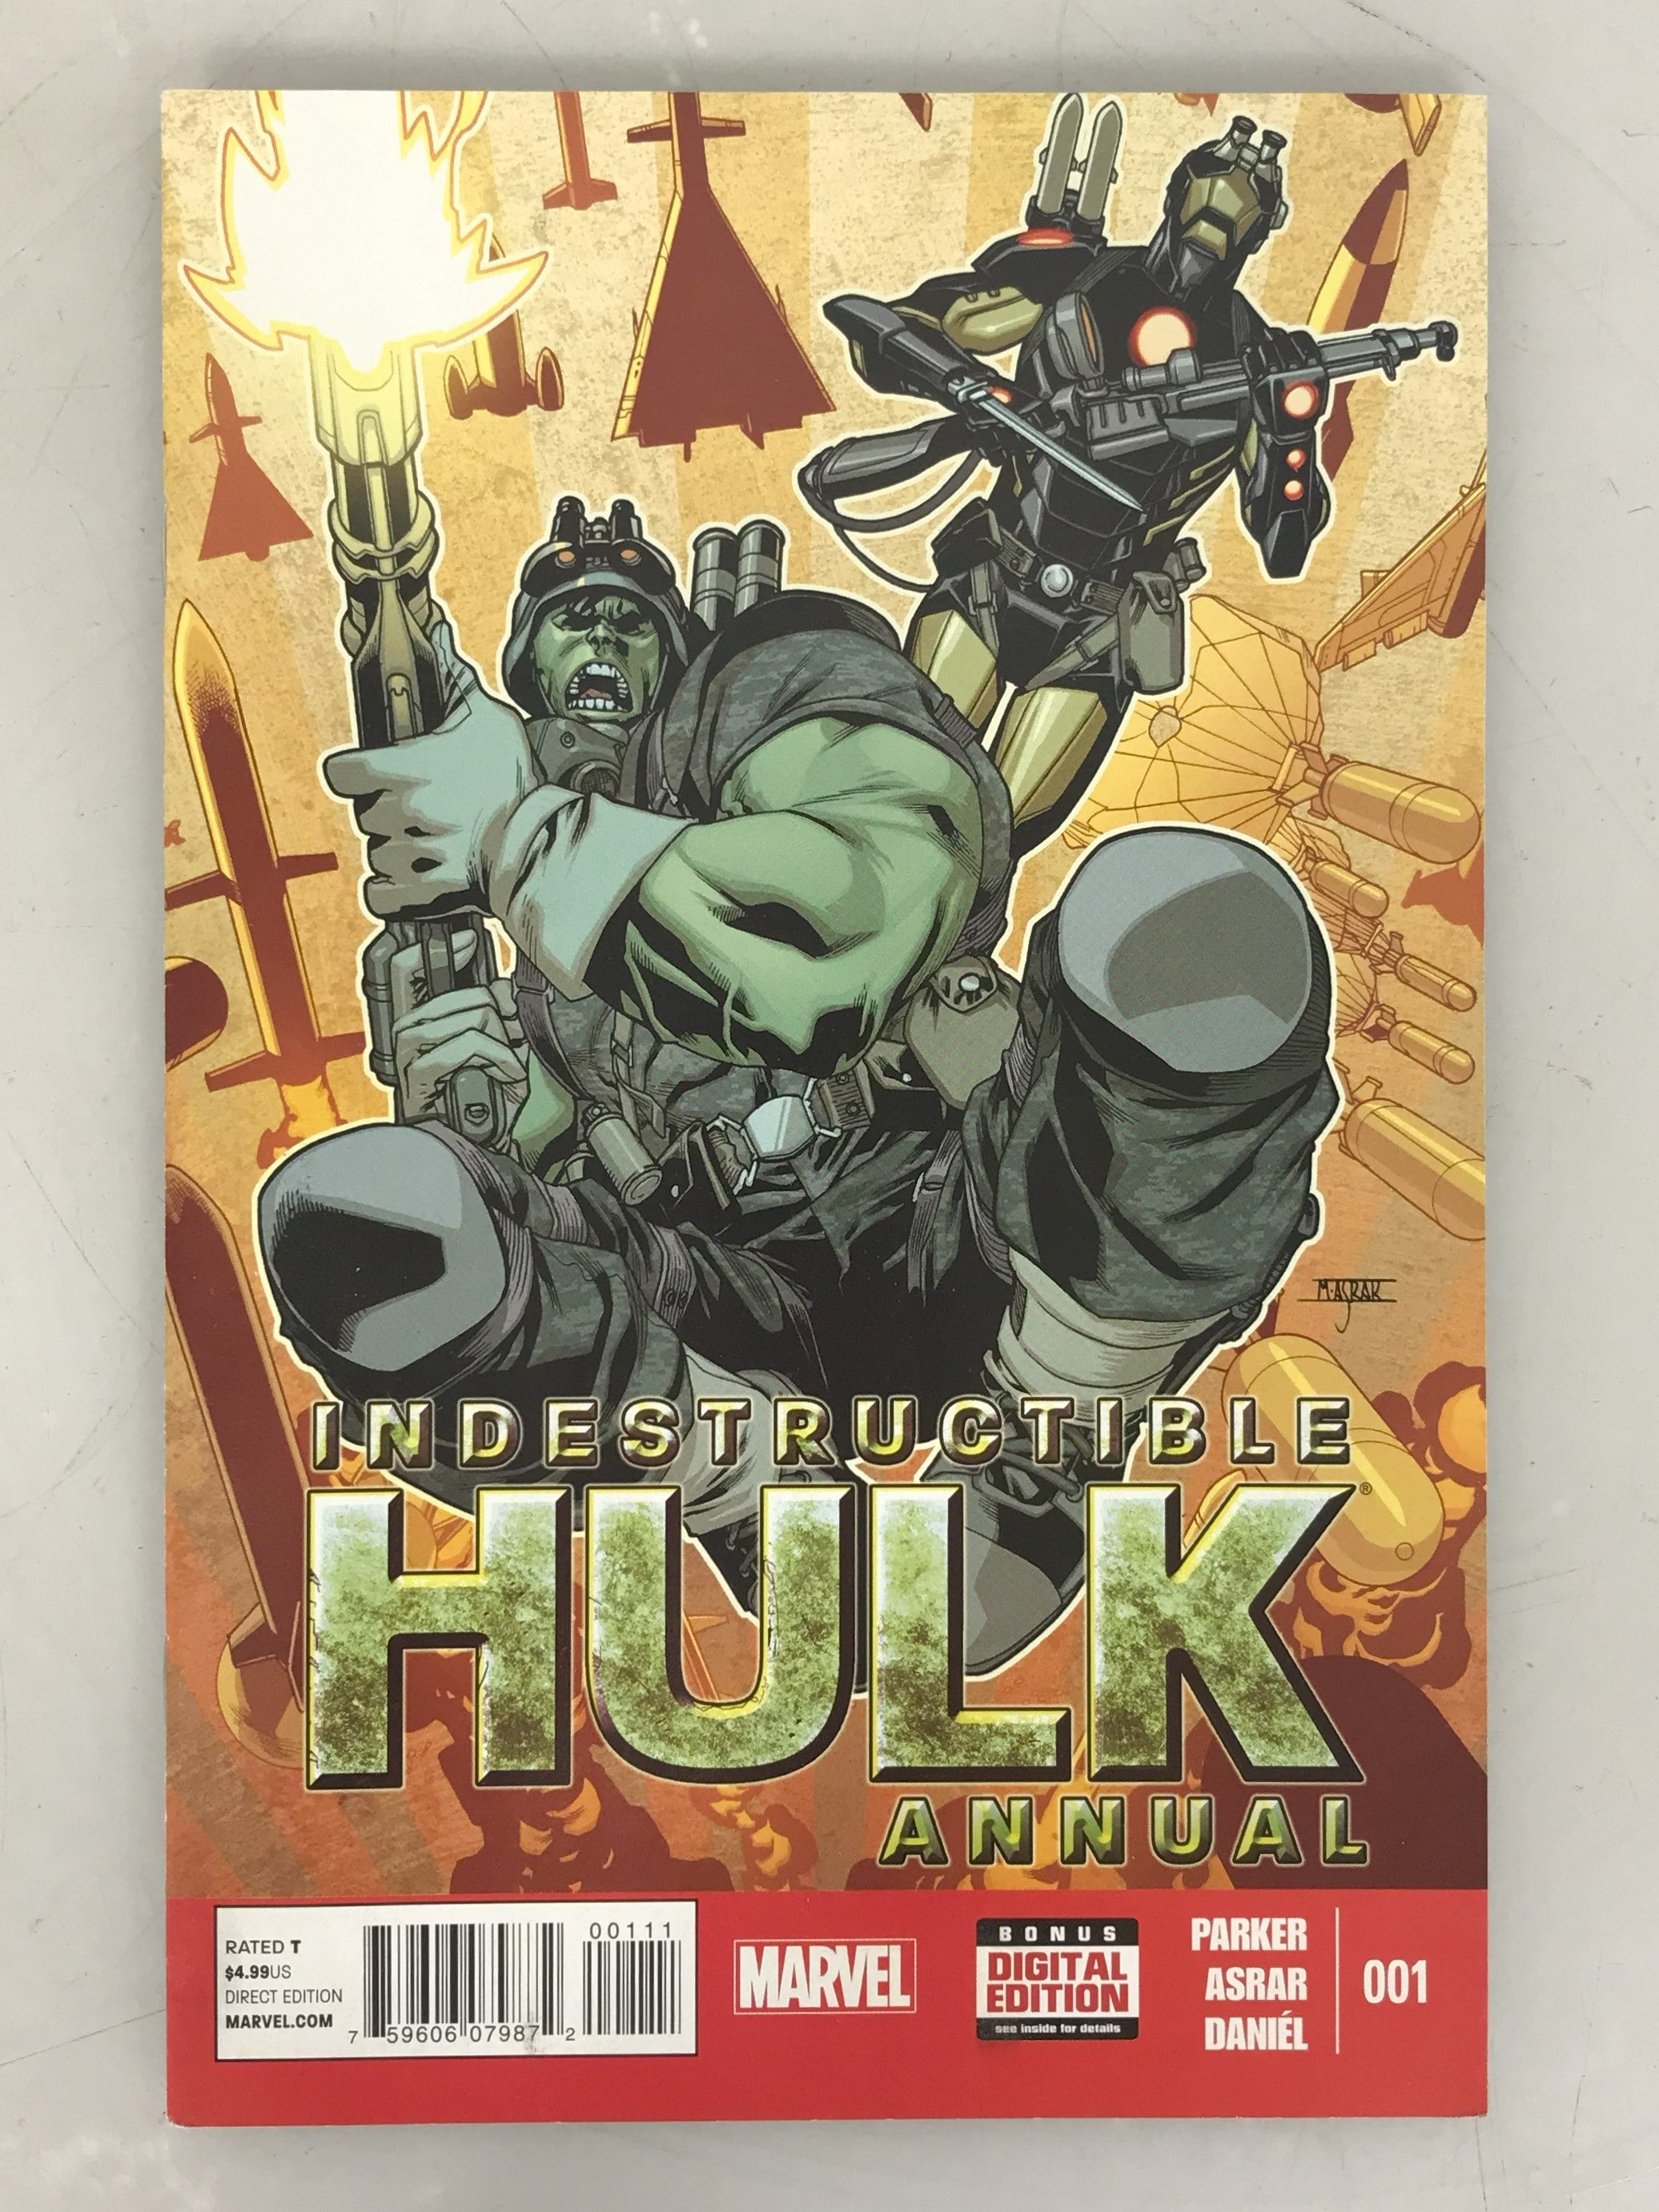 Indestructible Hulk Annual (with Digital Code) 1 2014